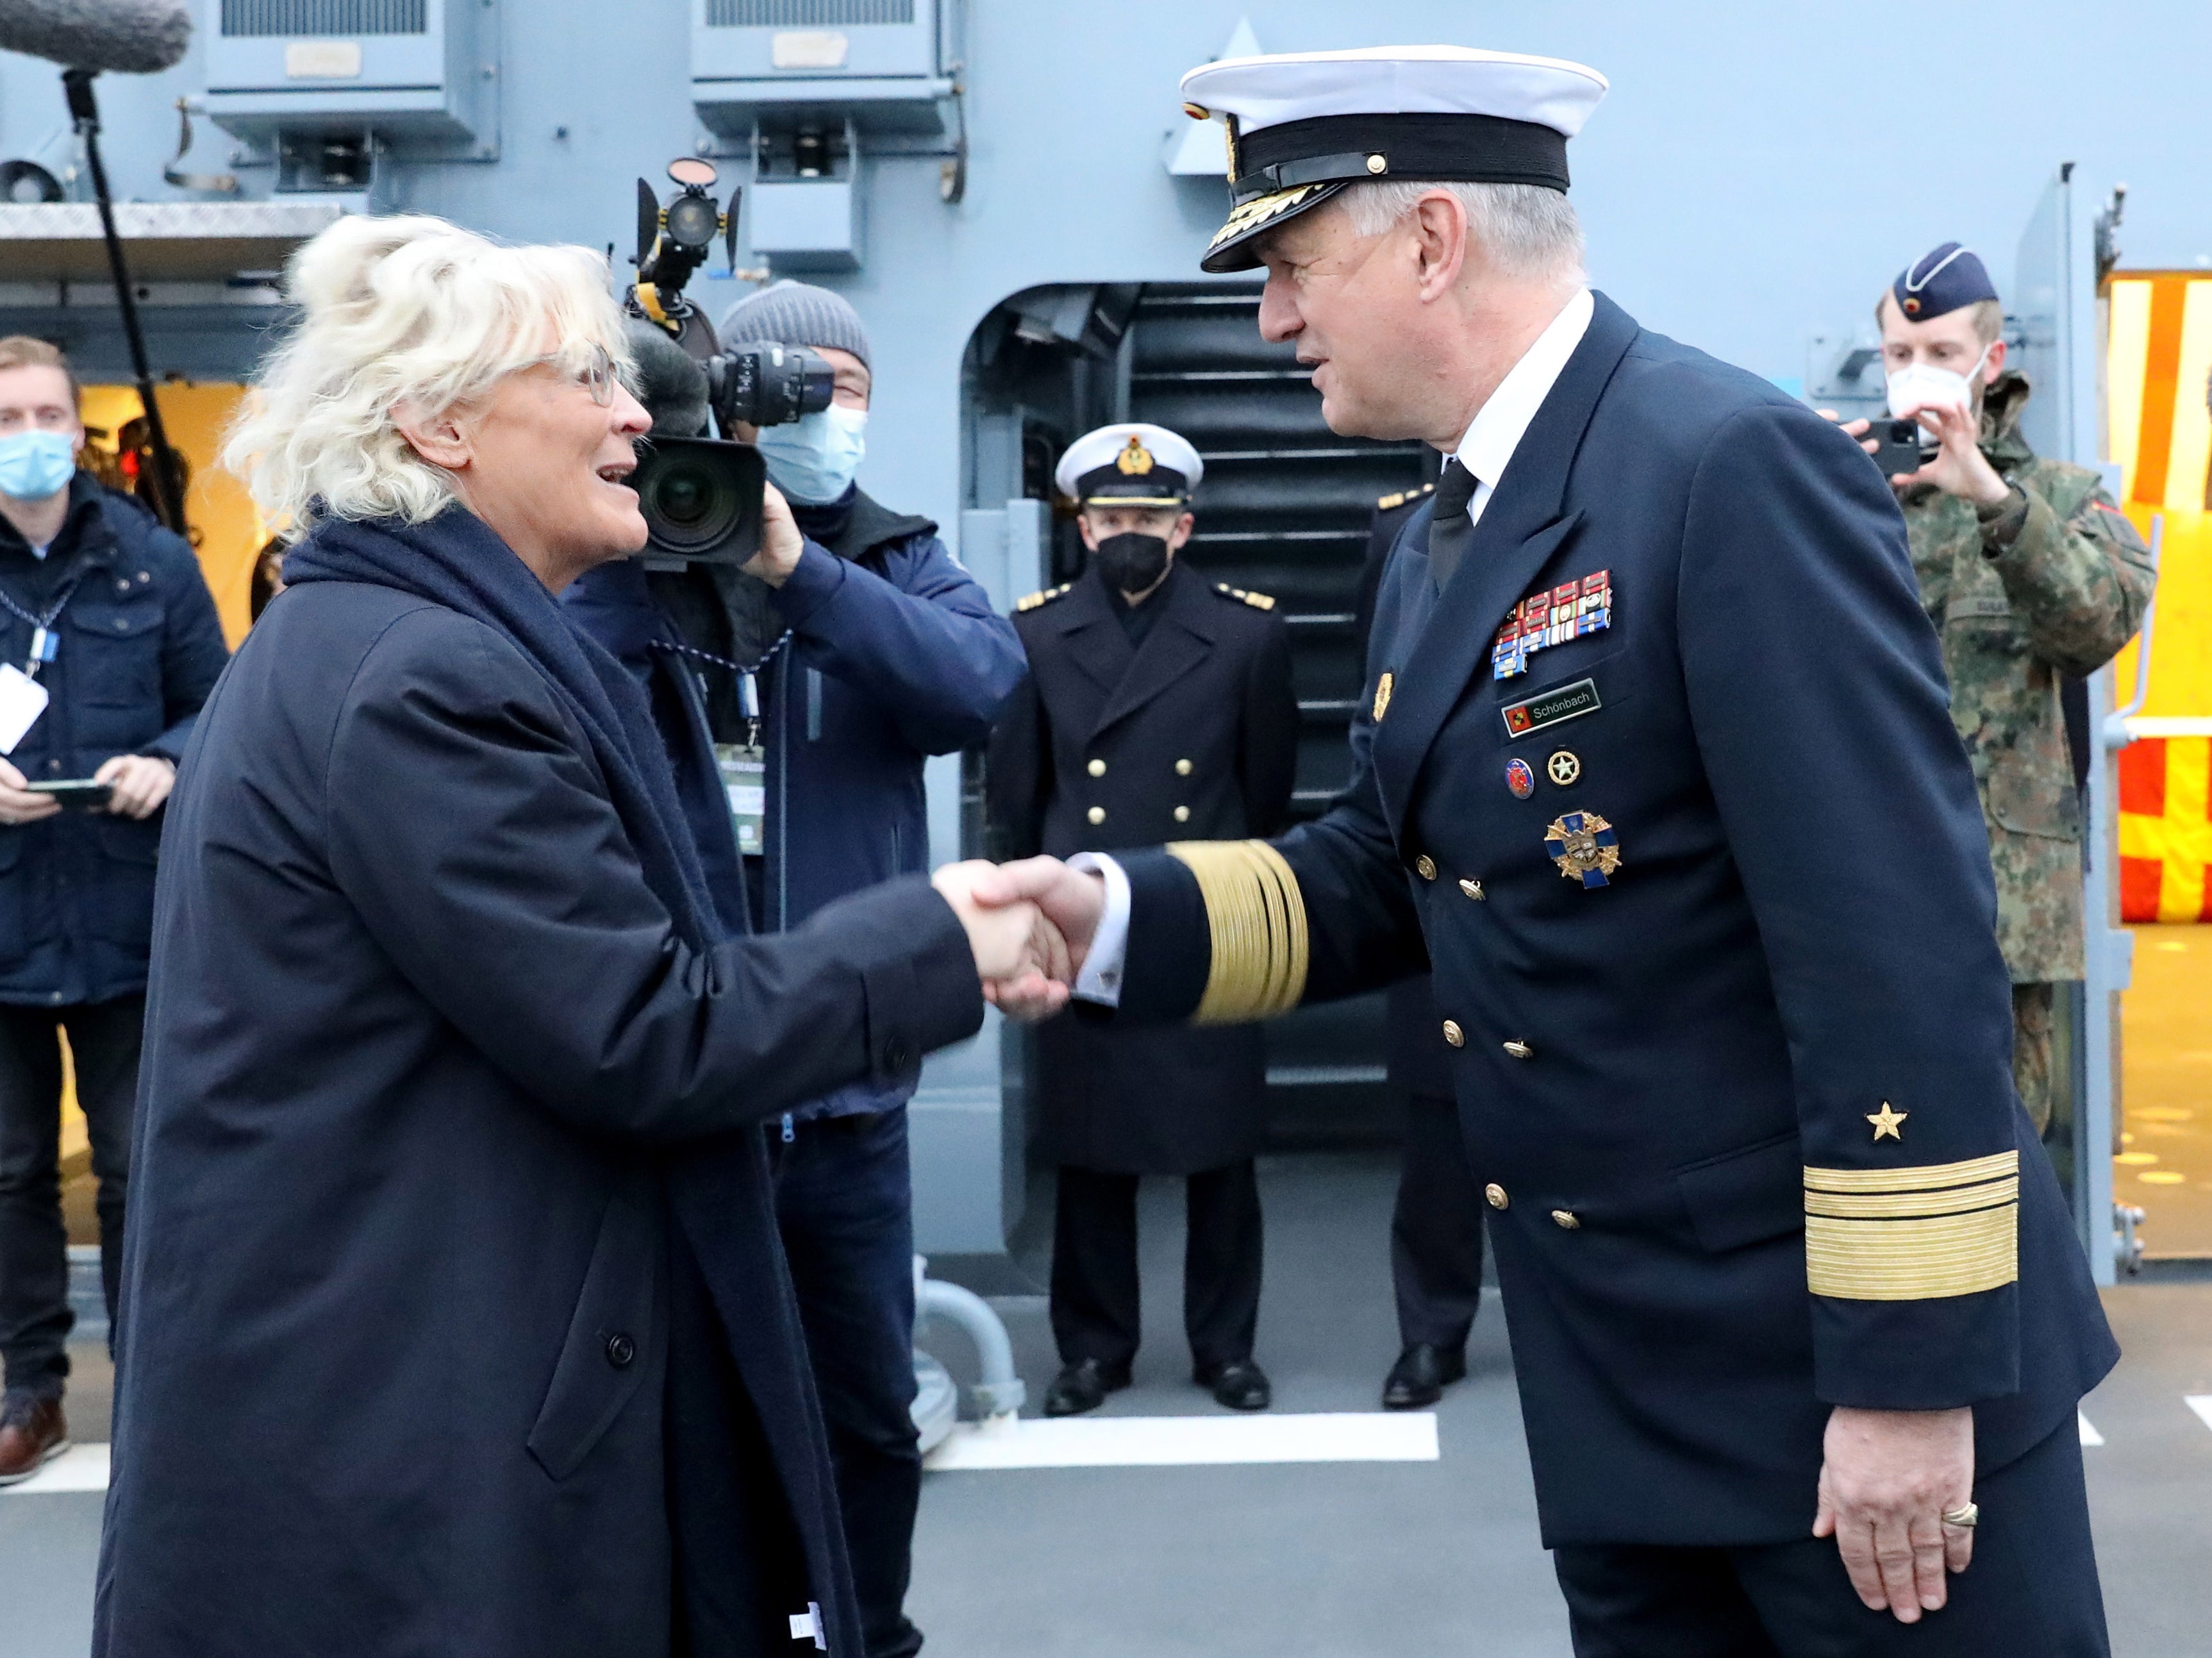 The head of the German navy, Kay-Achim Schoenbach (right), has resigned over controversial comments he made over Ukraine